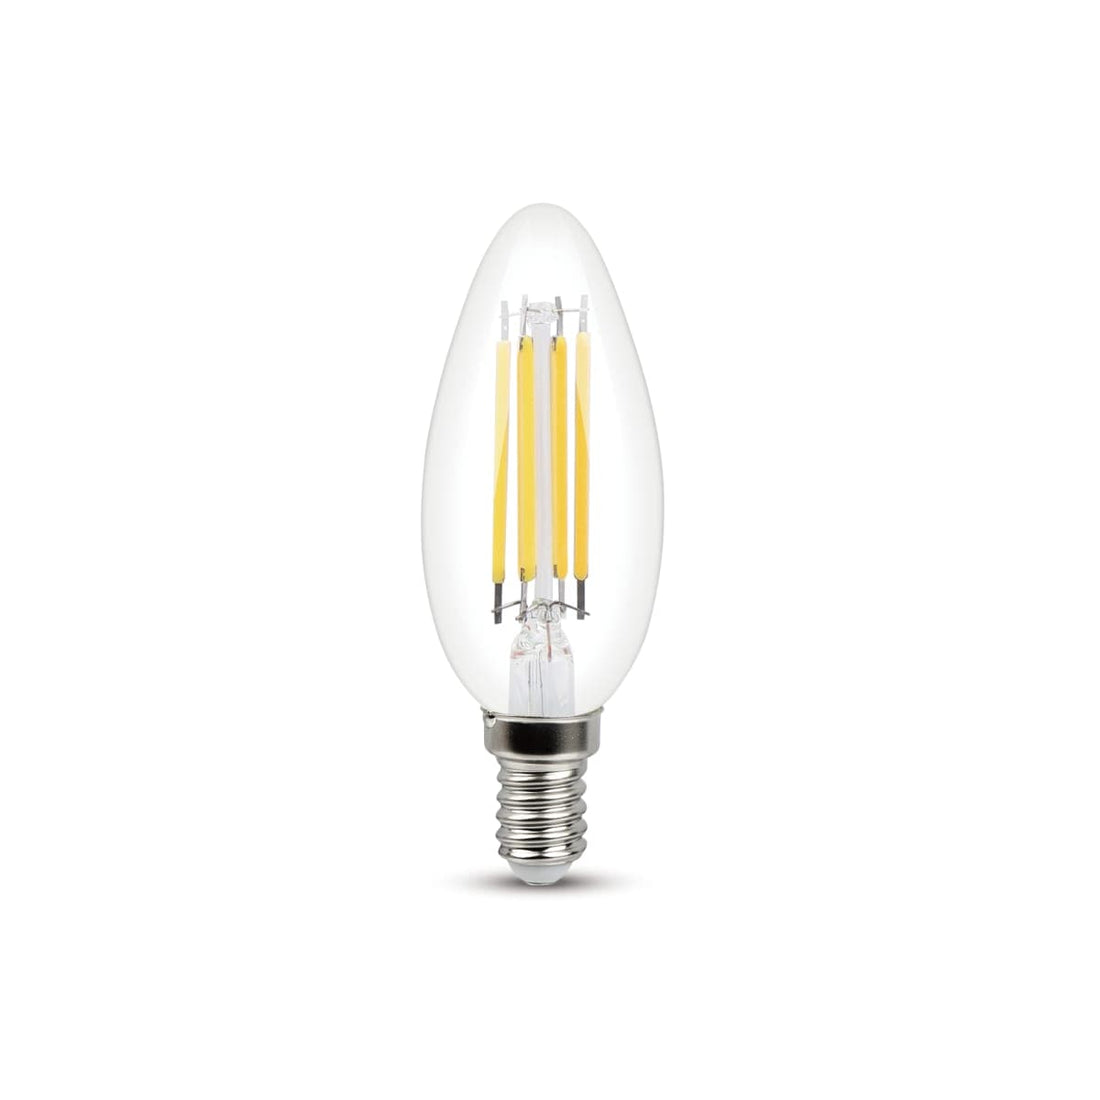 LED BULB E14=60W CANDLE CLEAR NATURAL LIGHT - best price from Maltashopper.com BR420007874